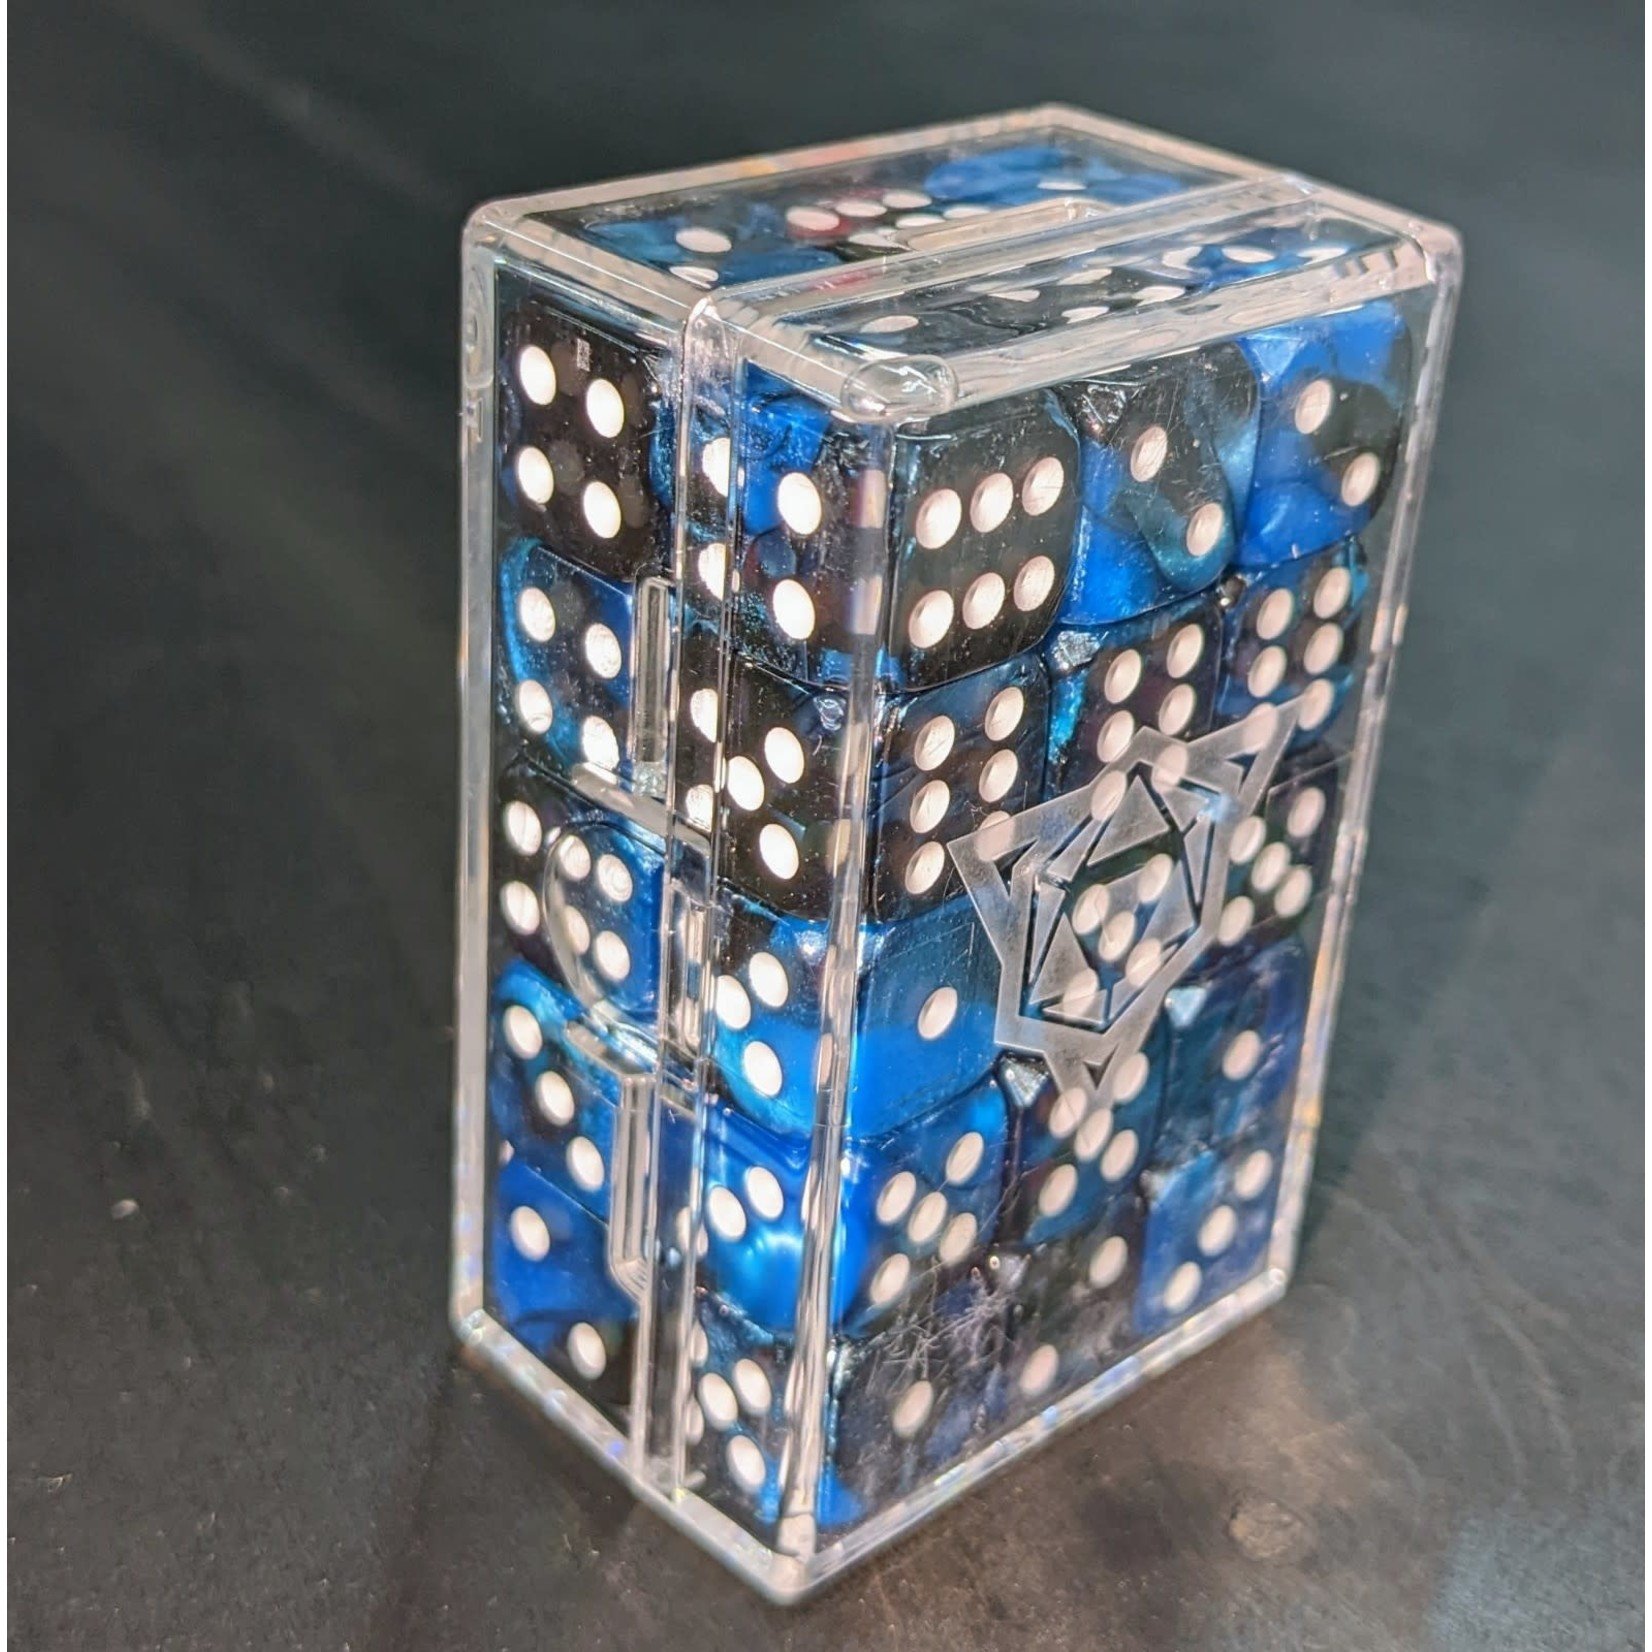 Die Hard Dice Vanguard 30-Pack of D6 Dice: Nocturne and Azure